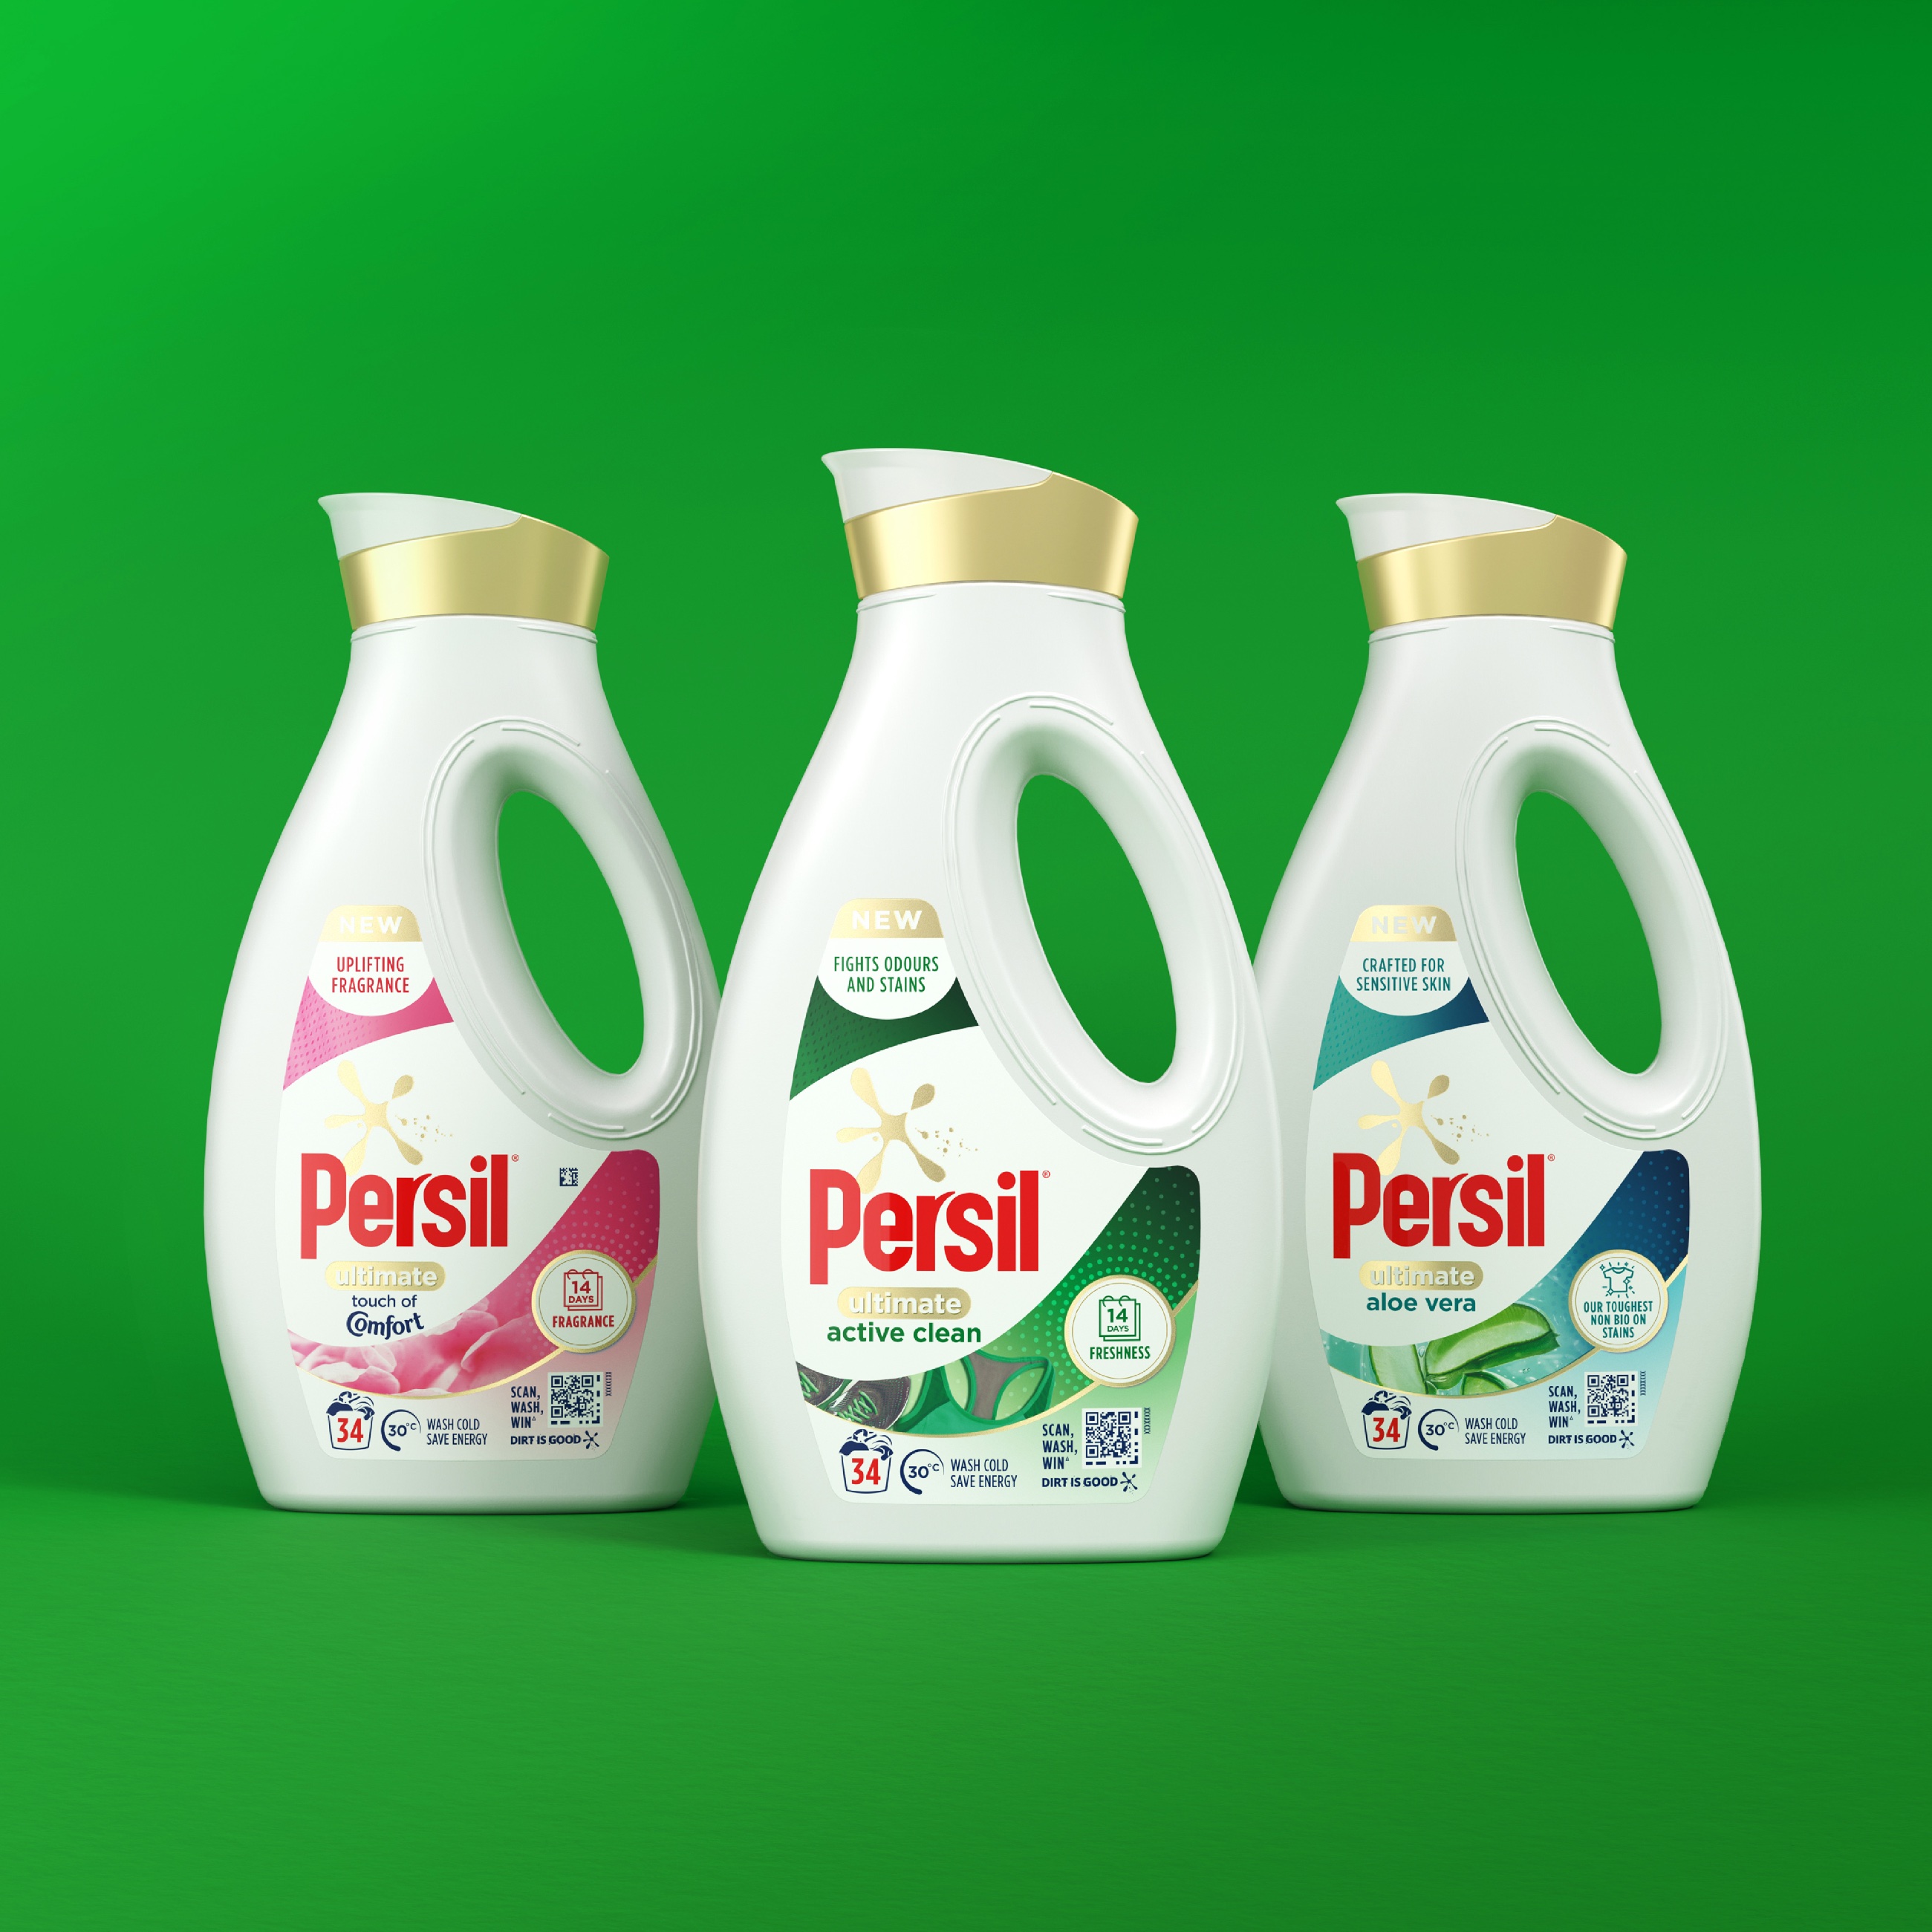 Persil Ultimate Elevating Persil’s Distinctive Splat to Clean Up in the Laundry Aisle